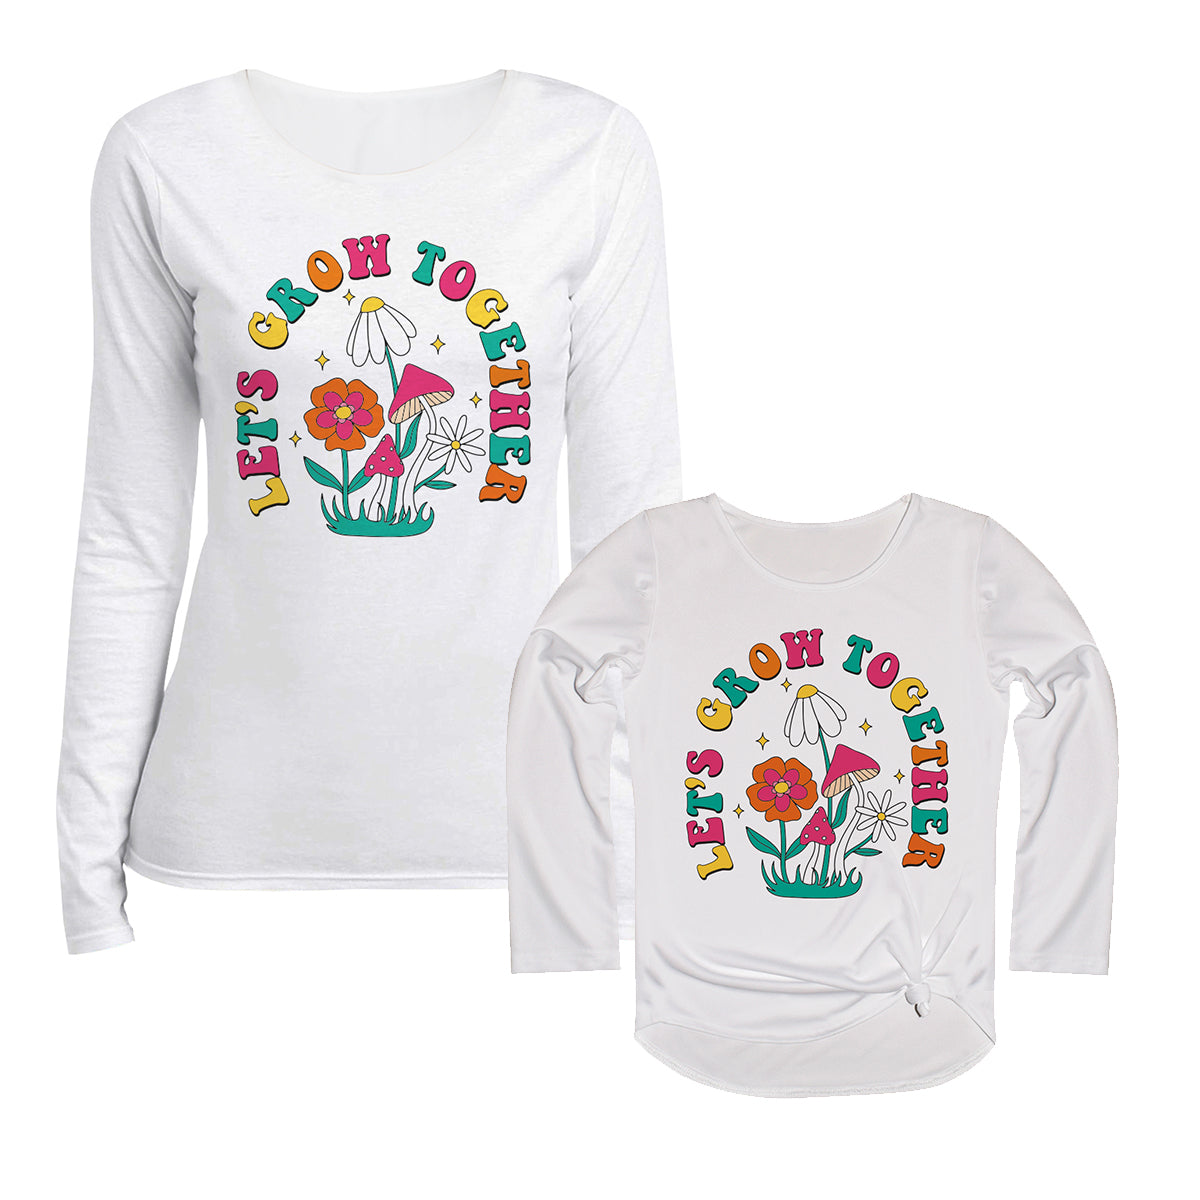 Lets Grow Together Flowers White Long Sleeve Tee Shirt - Wimziy&Co.